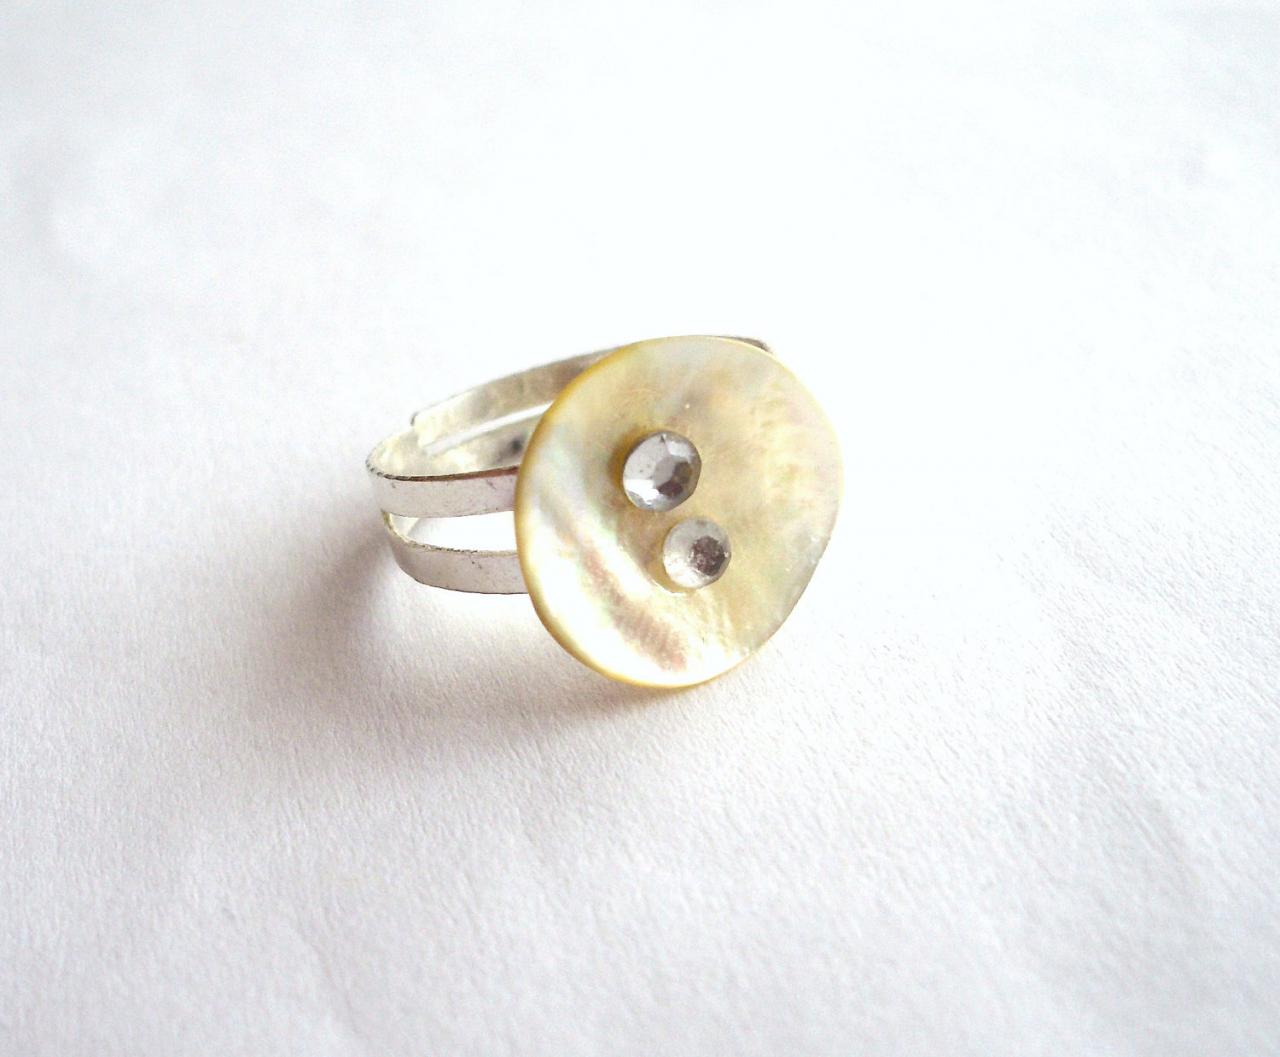 Adjustable Ring Made Of Vintage Pearl White Buttons With Tiny Rhinestones - Upcycled Jewelry, Soft, Pastel, Cream